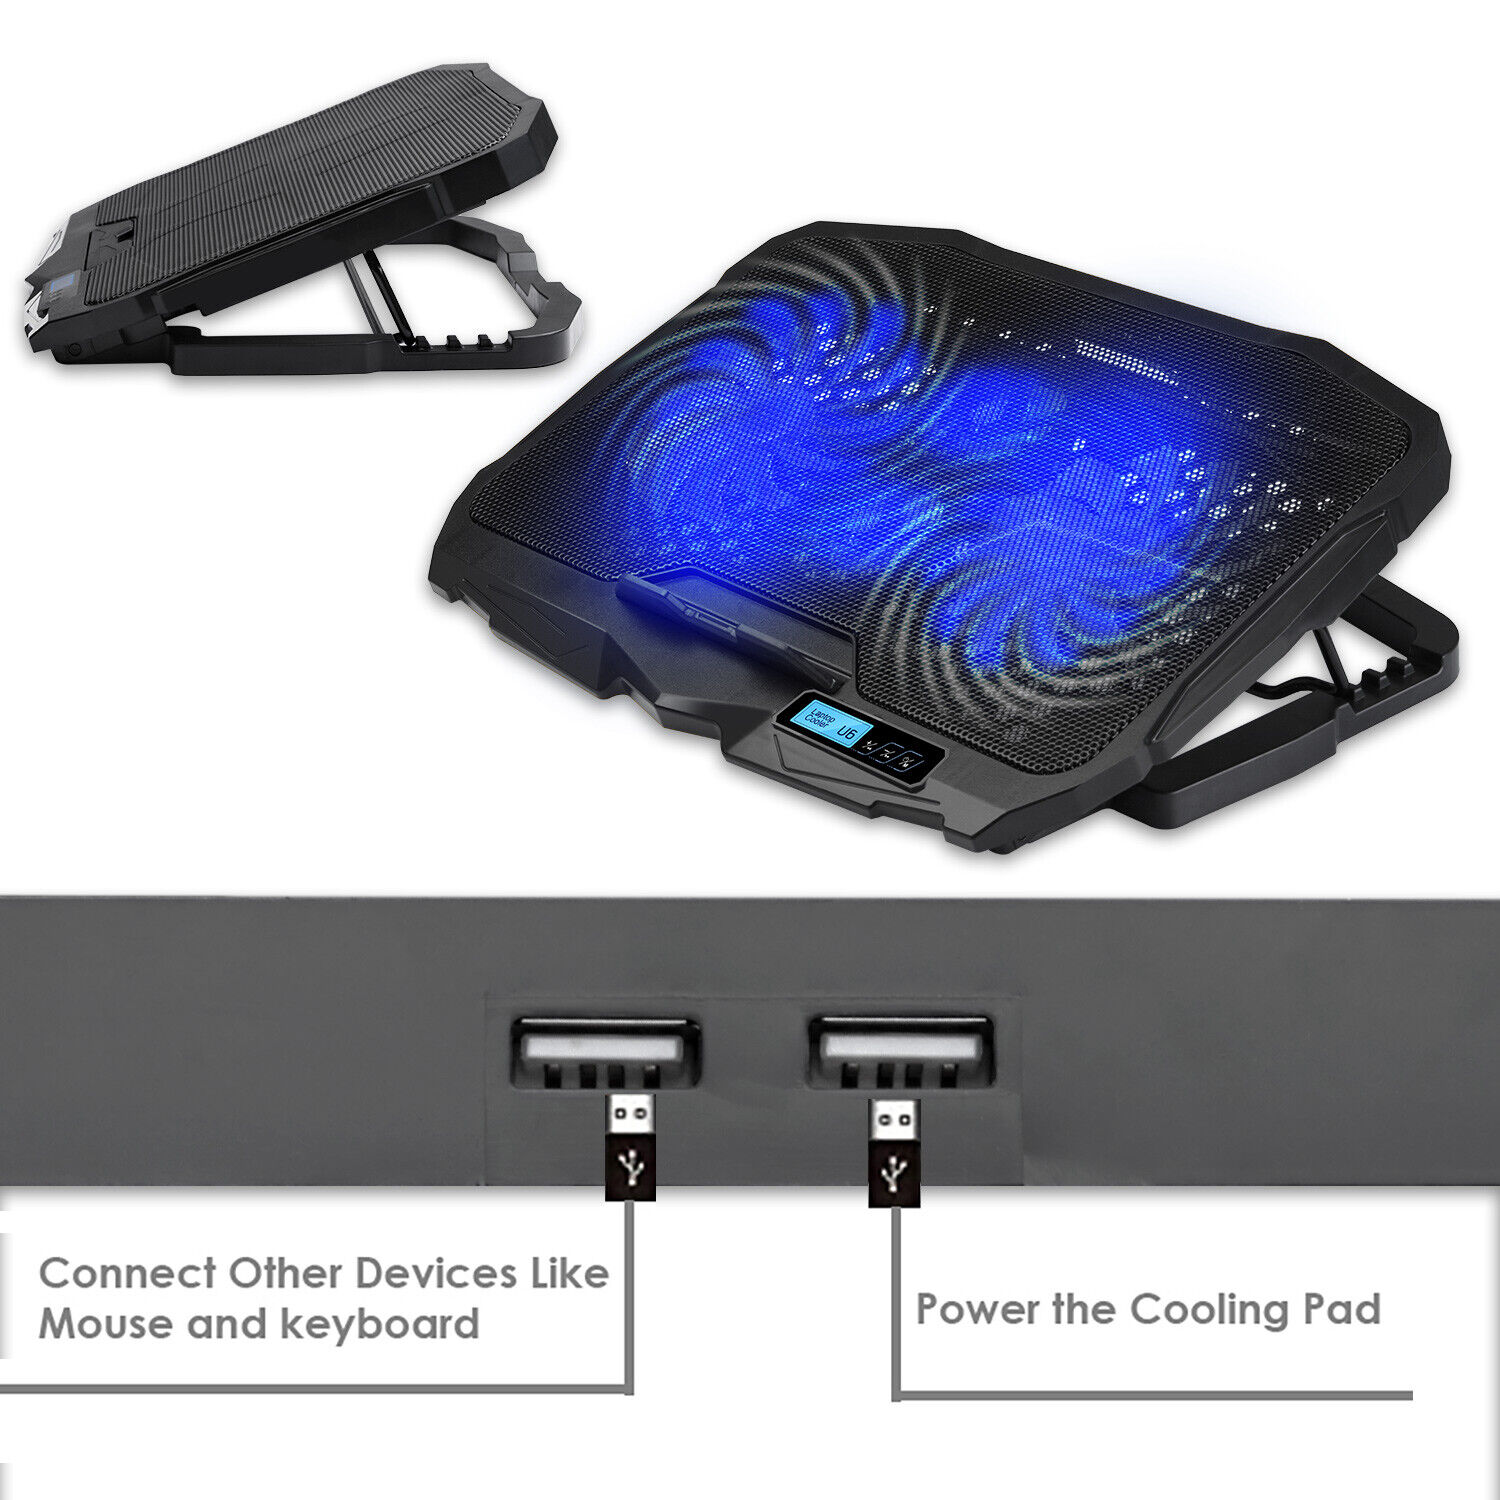 Wind Laptop Cooling Pad LED Display - 4 Blue LED Fans Light Quiet Rapid Cooler YELLOW-PRICE YP-LCP-45 - фотография #9